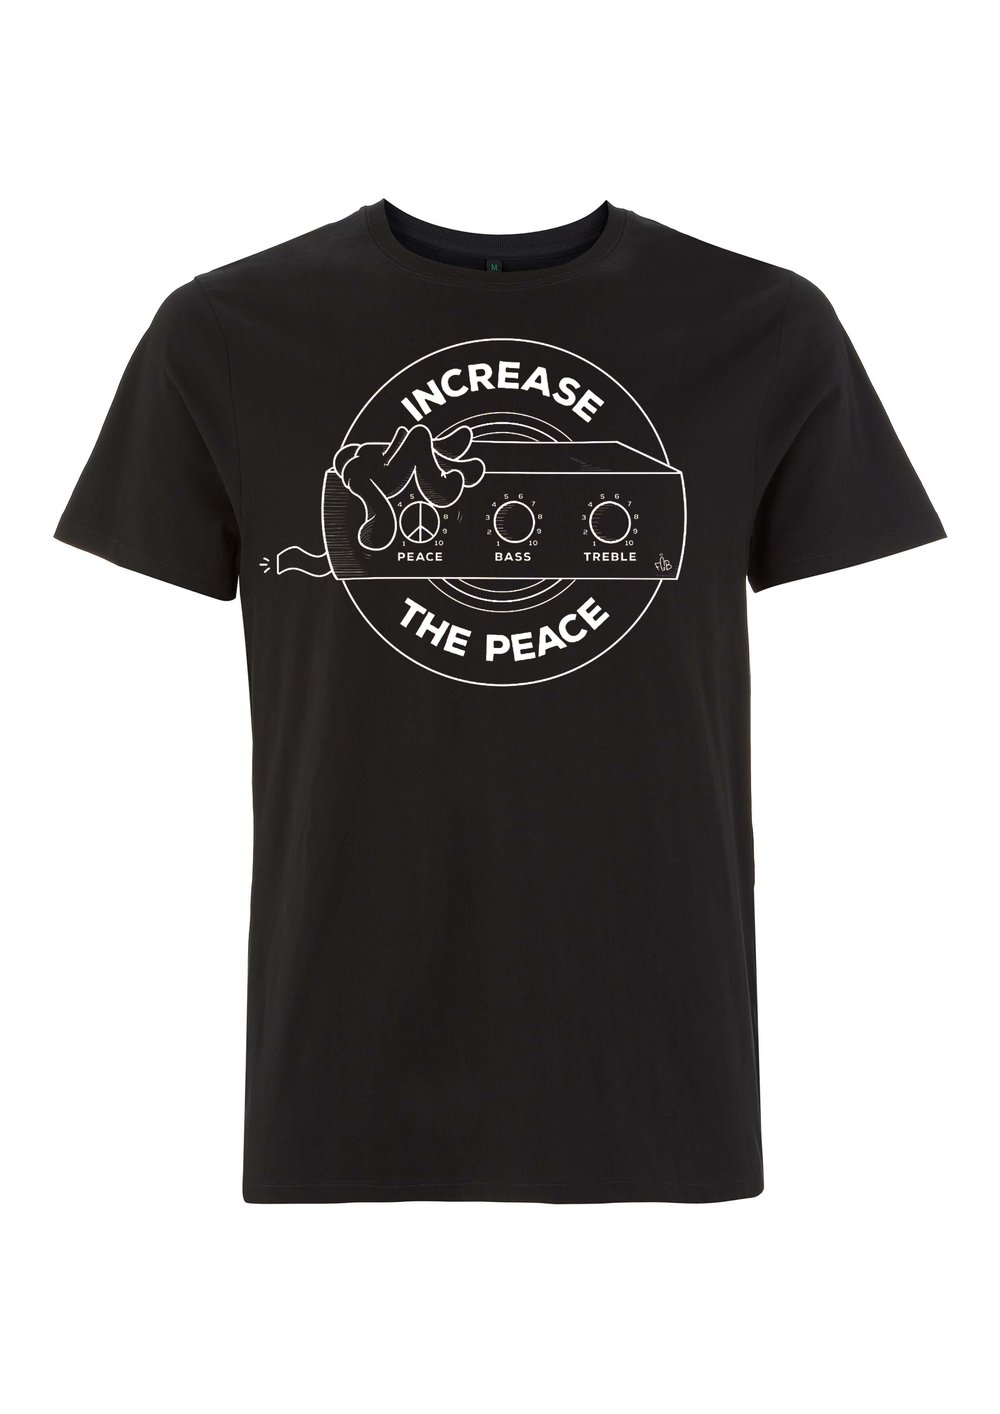 LIMITED EDITION - INCREASE THE PEACE TEE